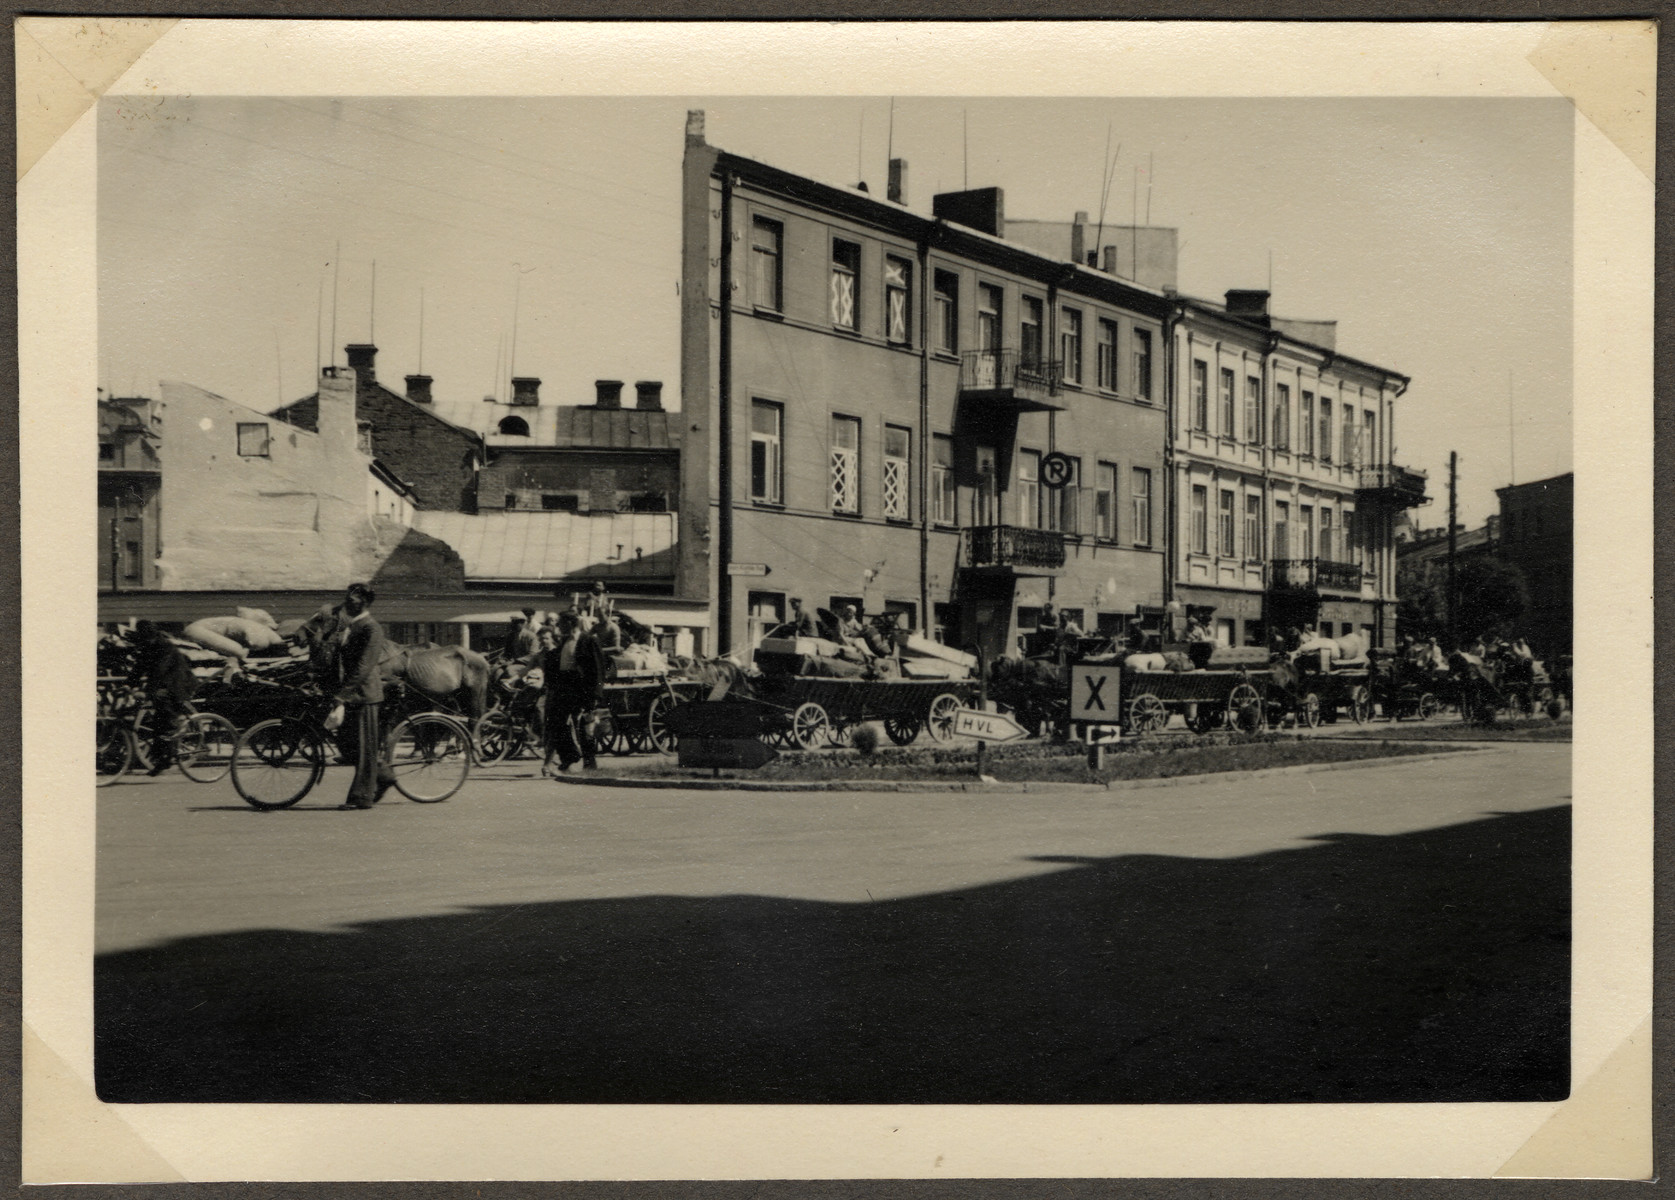 Jews move their belongings on carts and wagons from downtown Kaunas to the new ghetto located across the river in Slobodka.